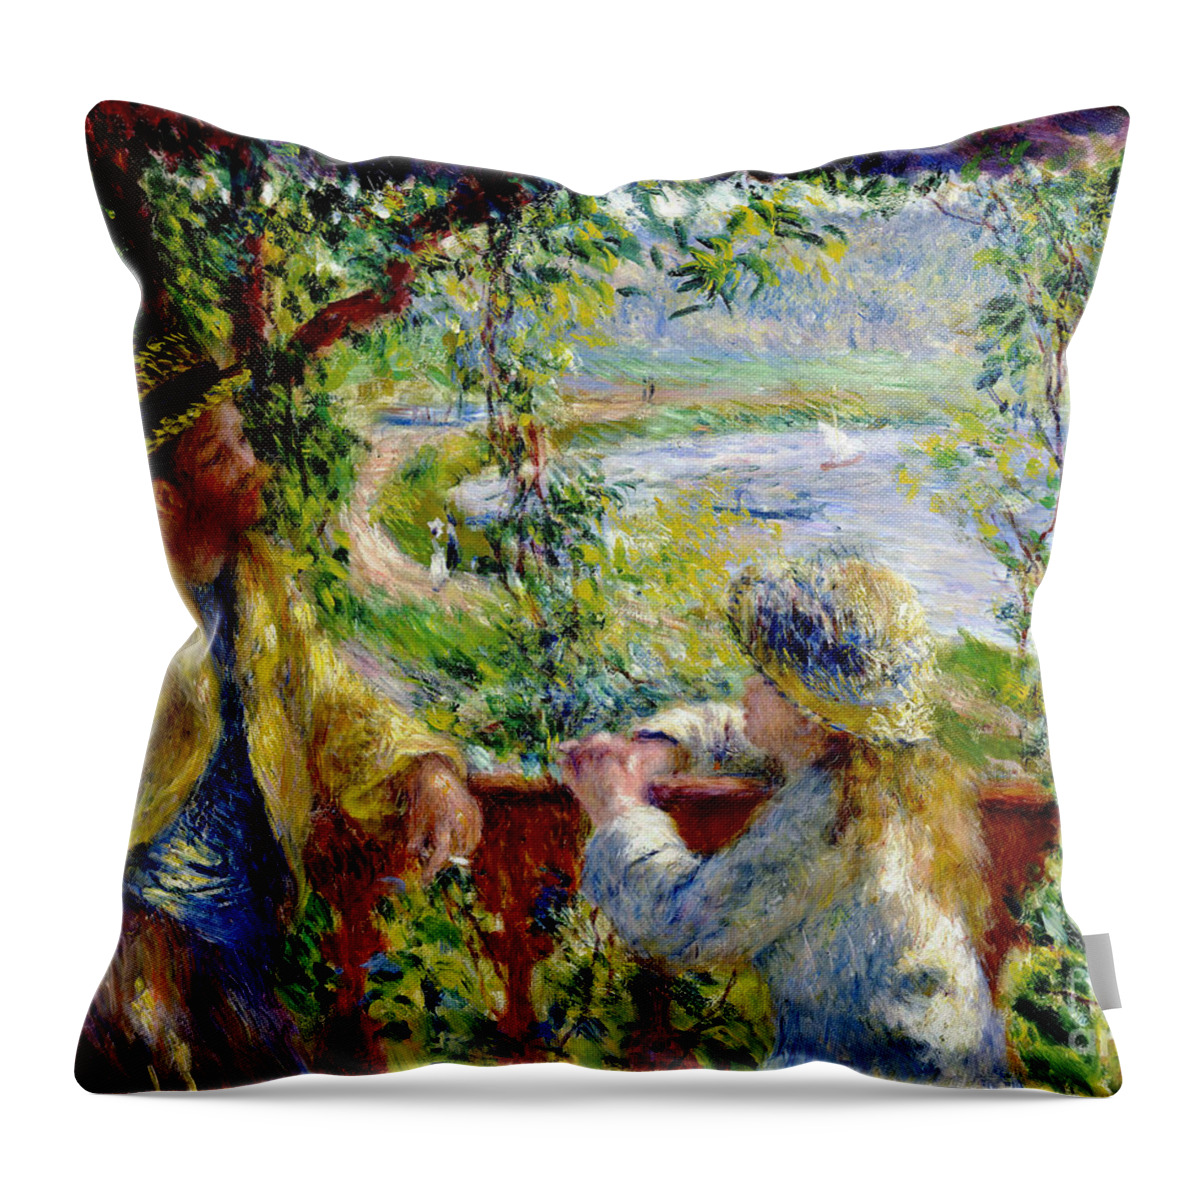 Waterside 1880 Throw Pillow featuring the painting Waterside 1880 by Padre Art